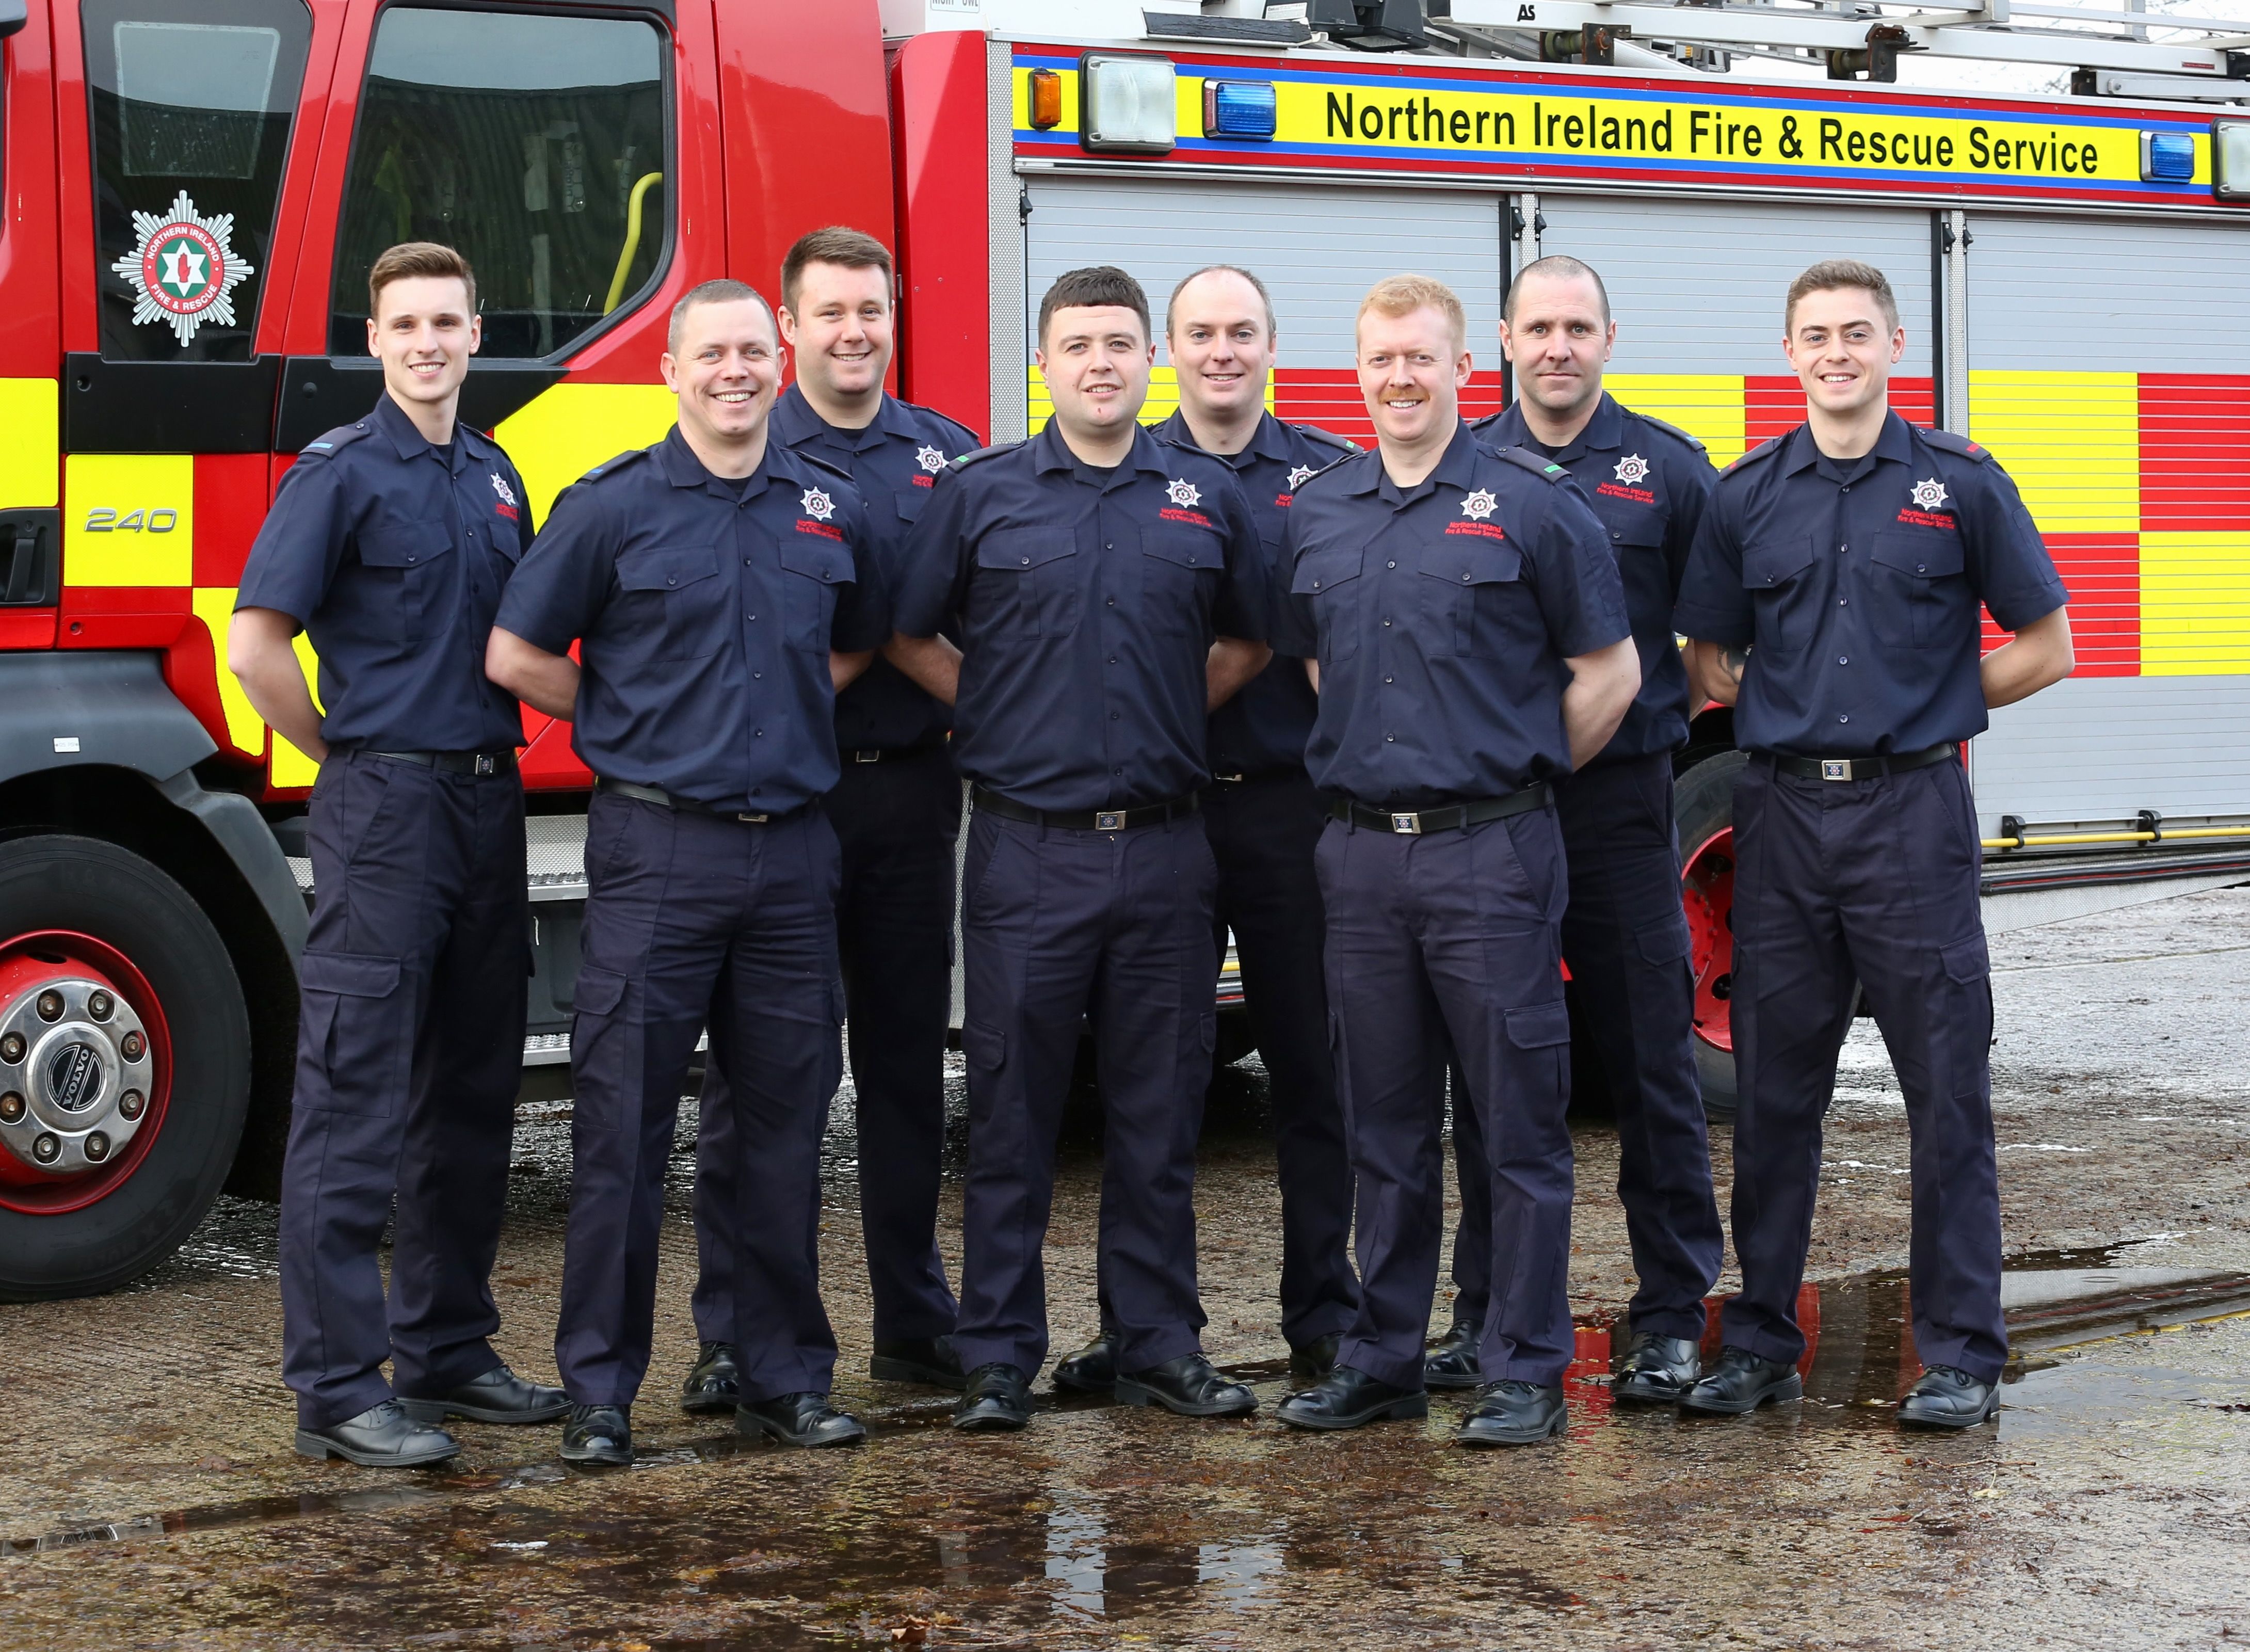 MILESTONE:  It was an historic day for NIFRS as it celebrated its final graduation ceremony at its Boucher Road HQ